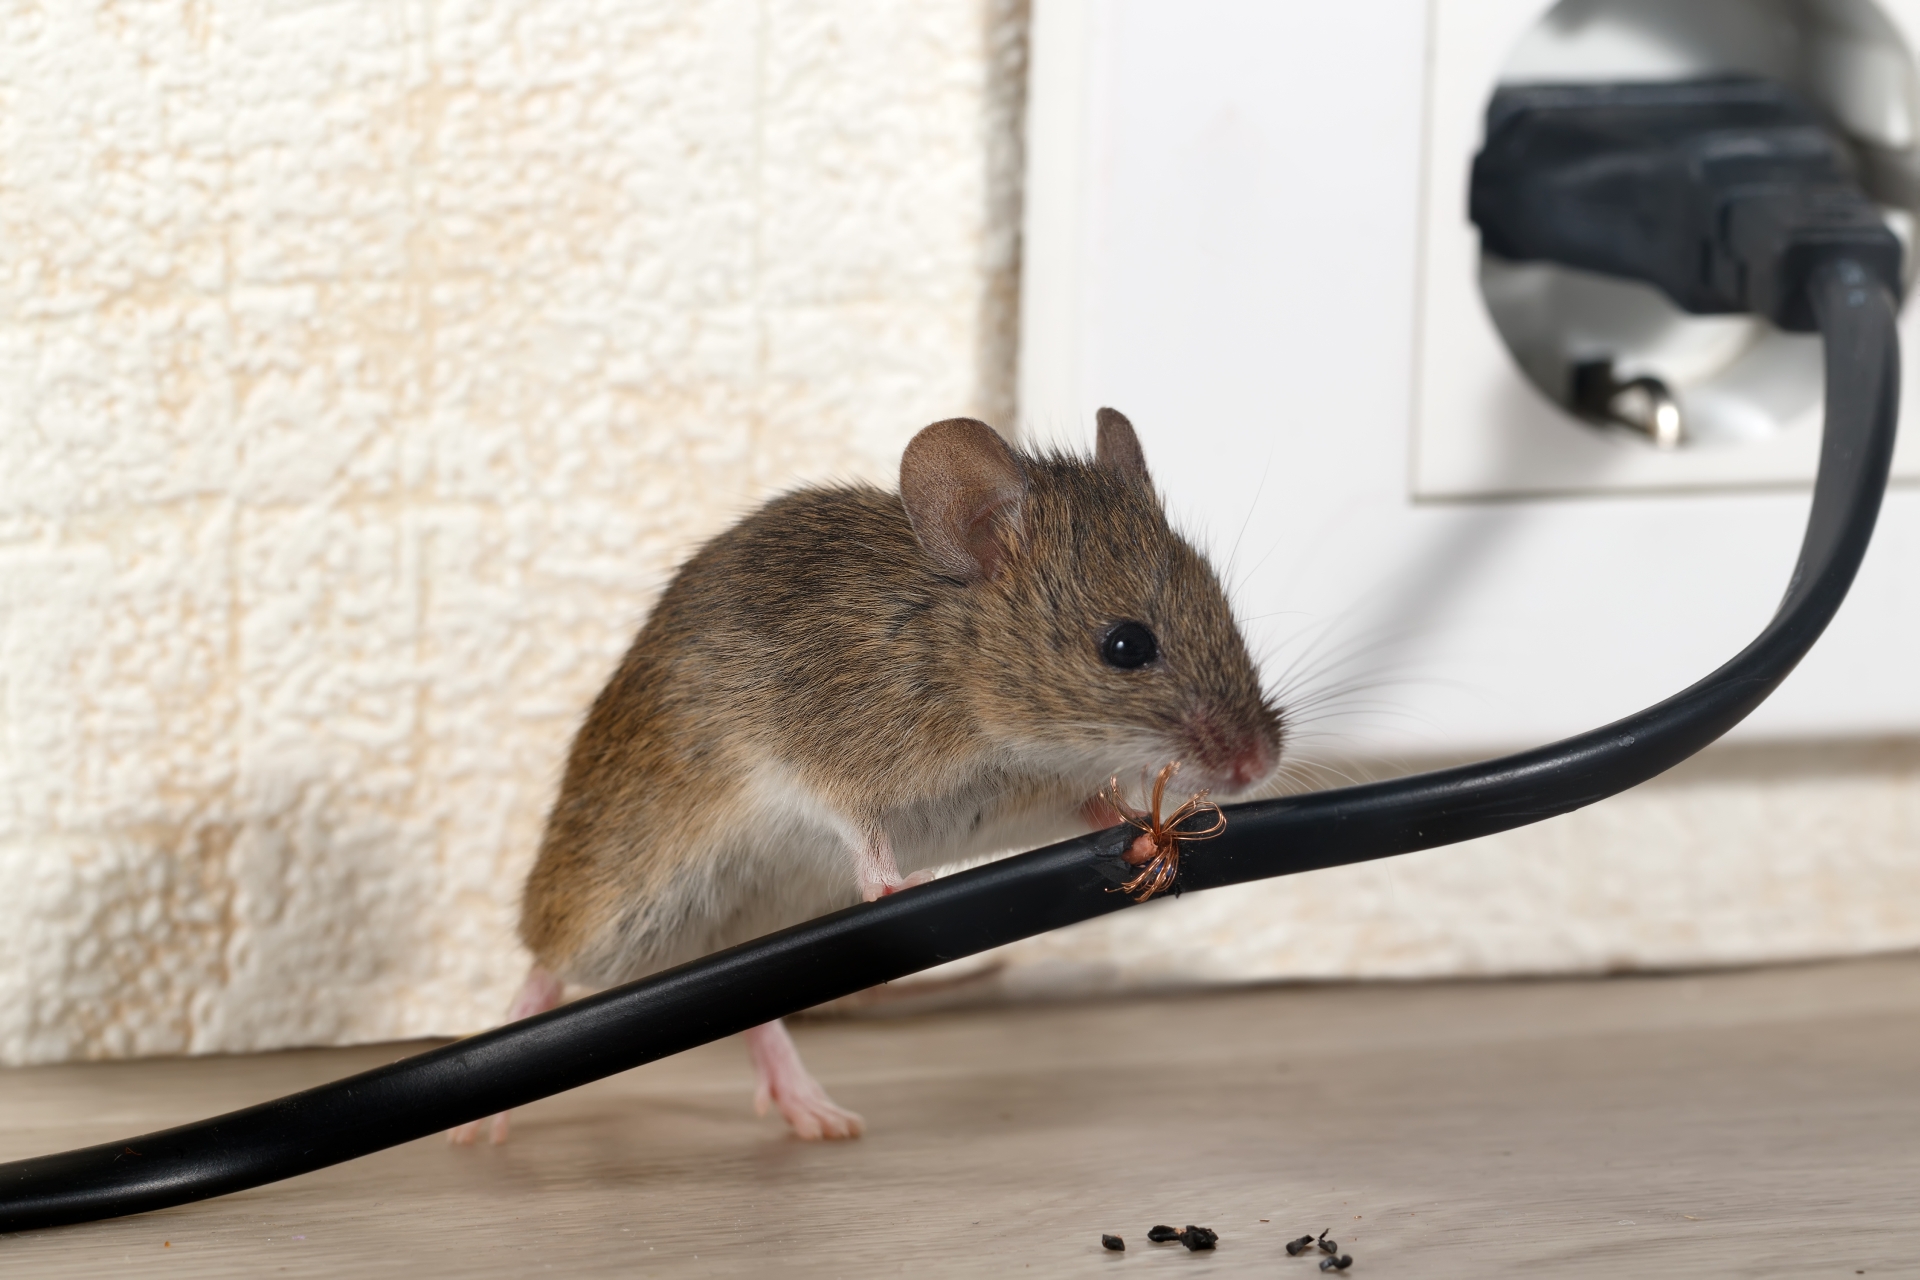 Mice Infestation, Pest Control in Perivale, UB6. Call Now 020 8166 9746